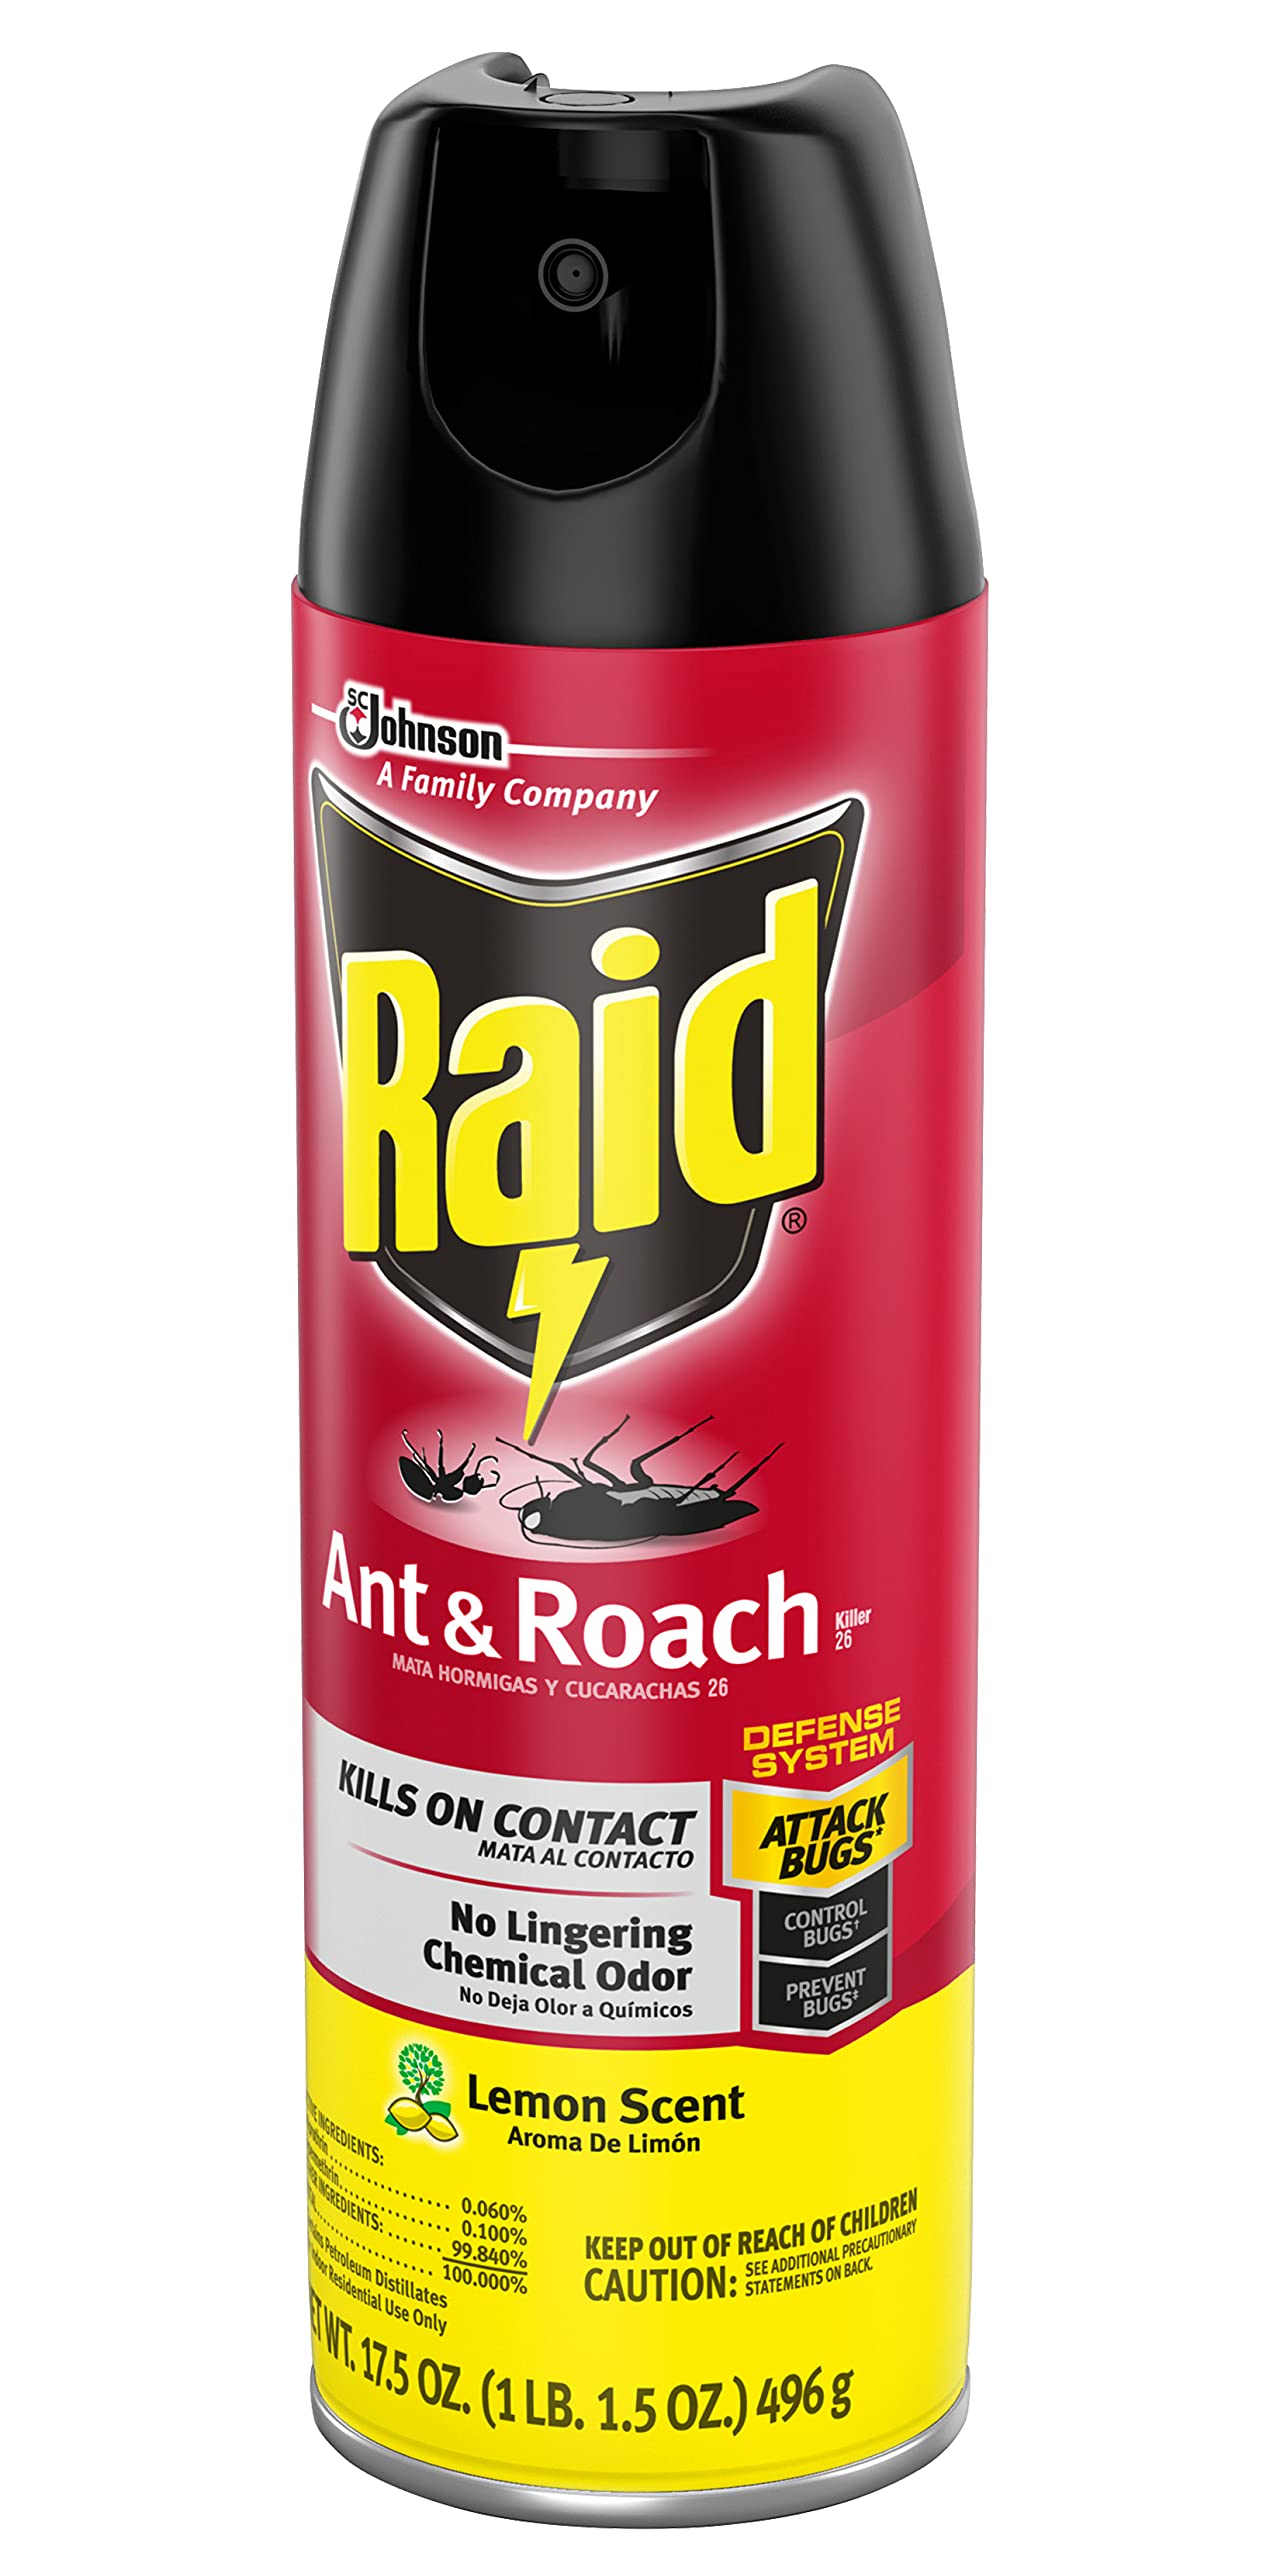 Raid Ant & Roach Spray Defense System, Lemon Scent, Attacks Bugs & Kills on Contact for up to 4 Weeks, No Lingering Chemical Odor, 17.5-Ounce (Pack of 5)